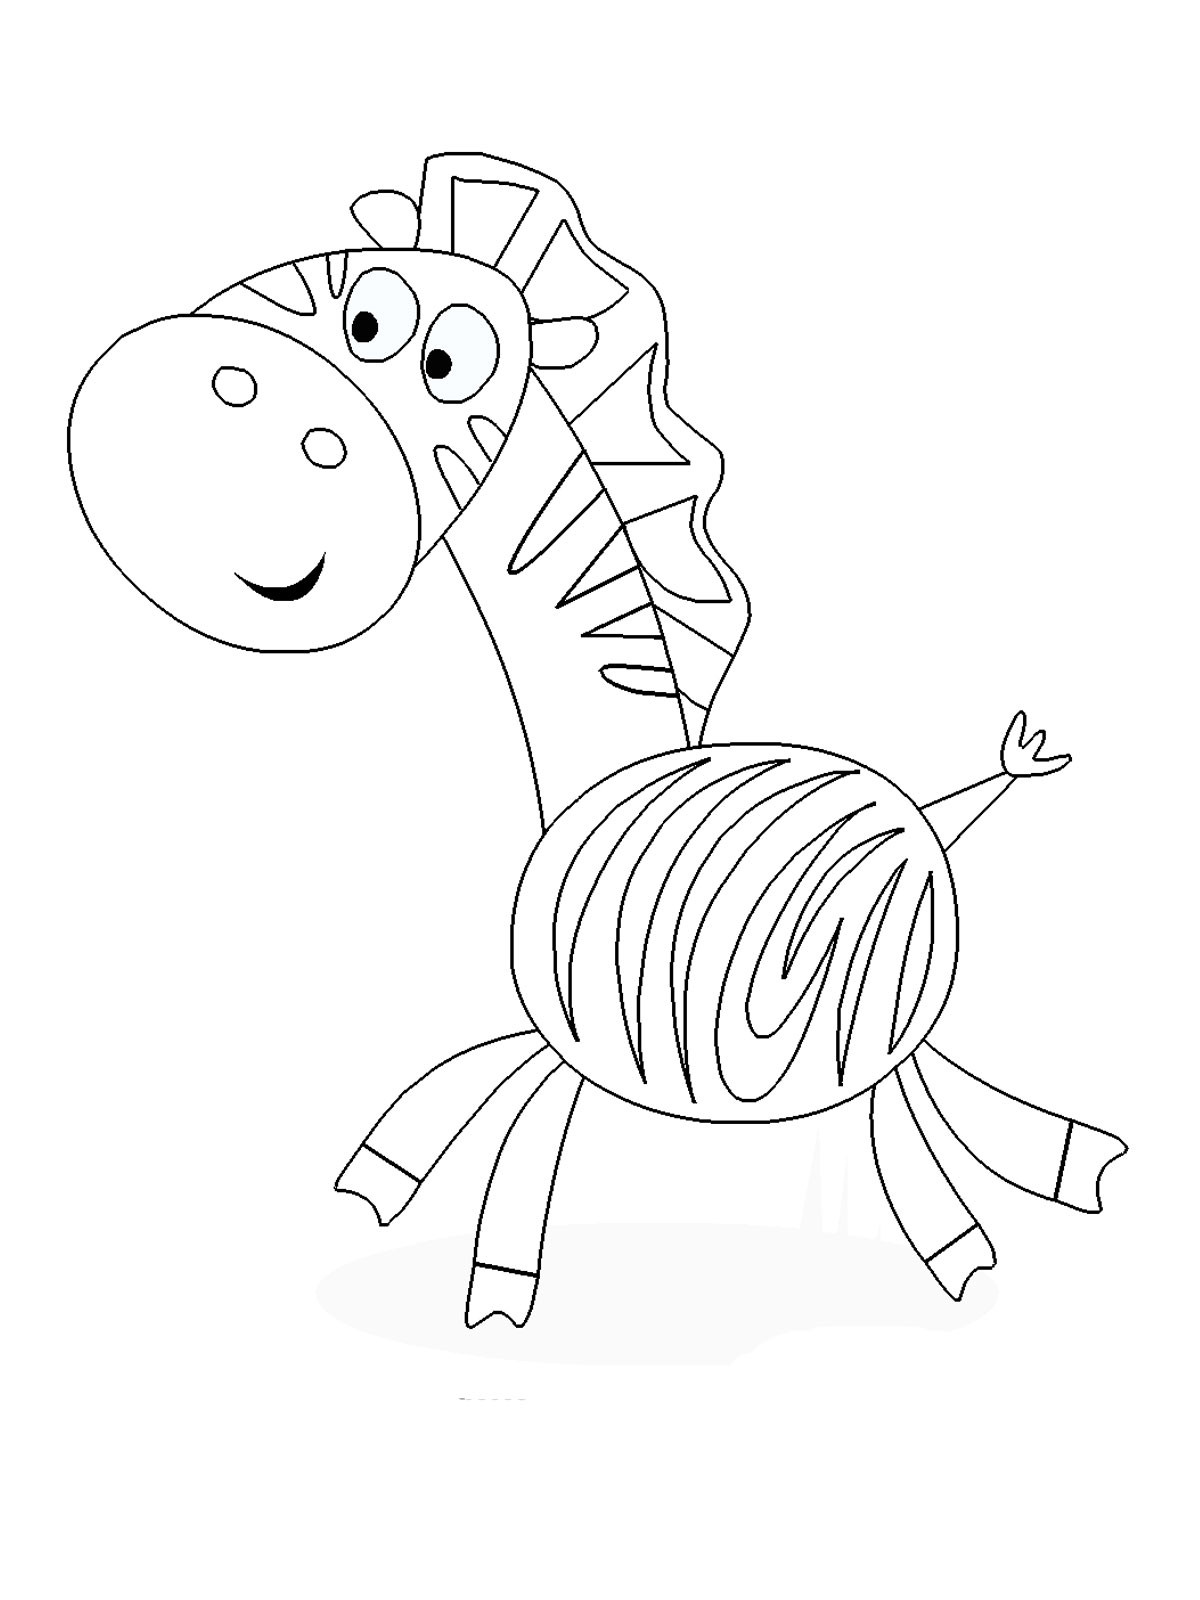 Printable Coloring Pages Kids
 Printable coloring pages for kids